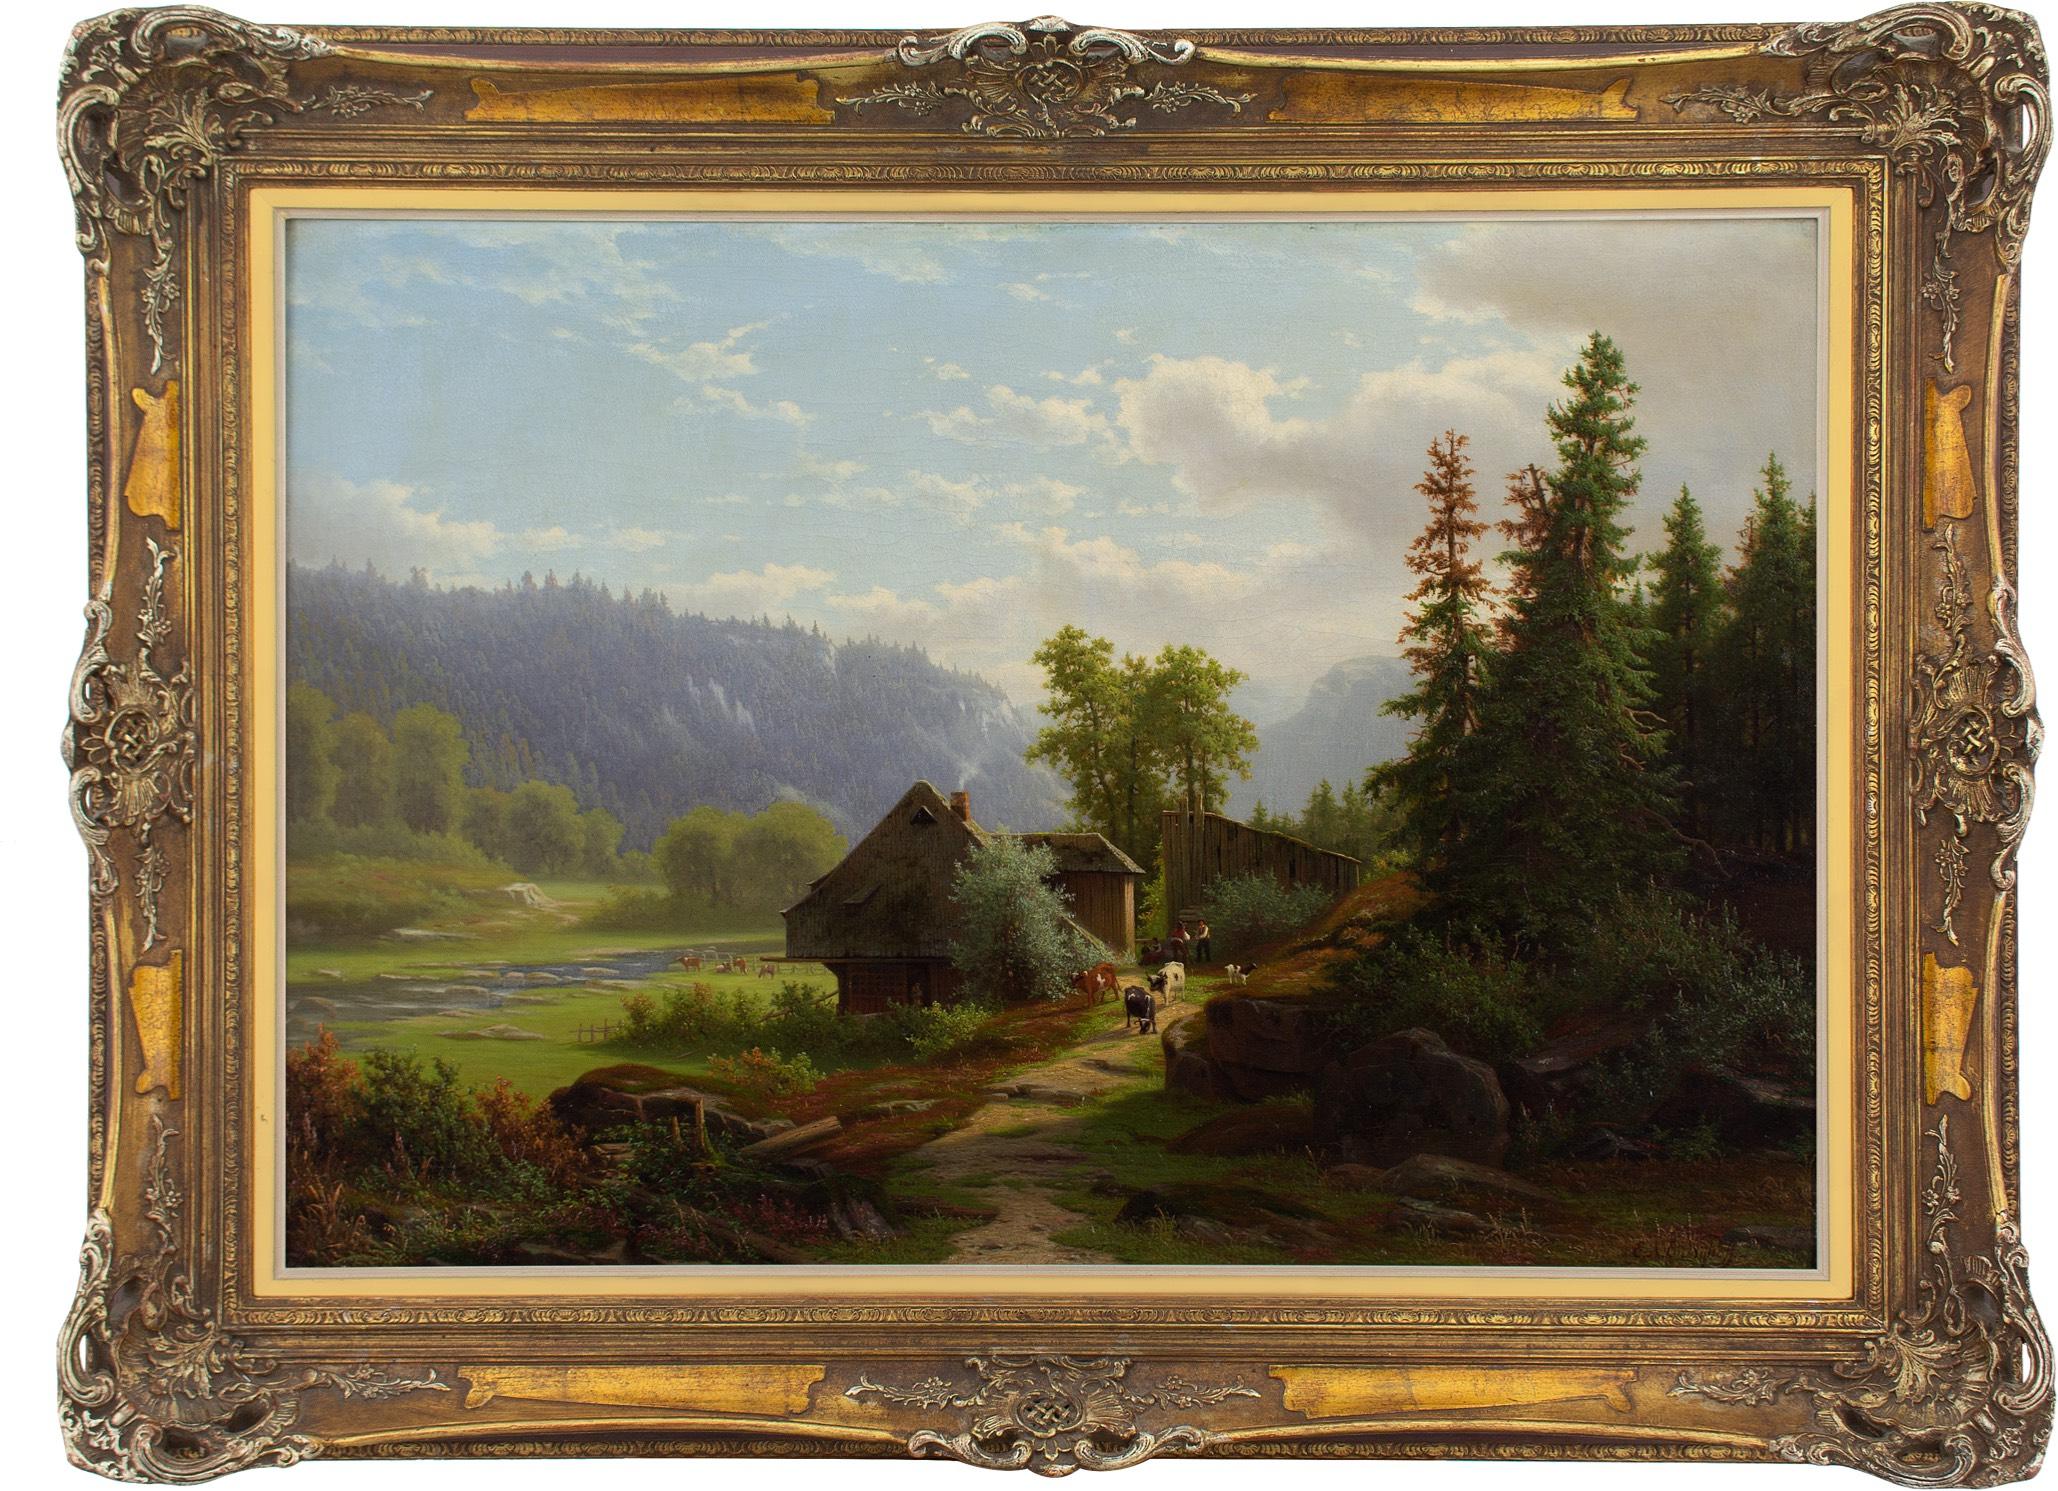 This breathtaking landscape painting by Dutch artist Eliza Agnetus Emilius Nijhoff (1826-1903) depicts an extensive view in the Black Forest. It’s exquisitely rendered and created by an artist with a deep connection to the natural world.

In the